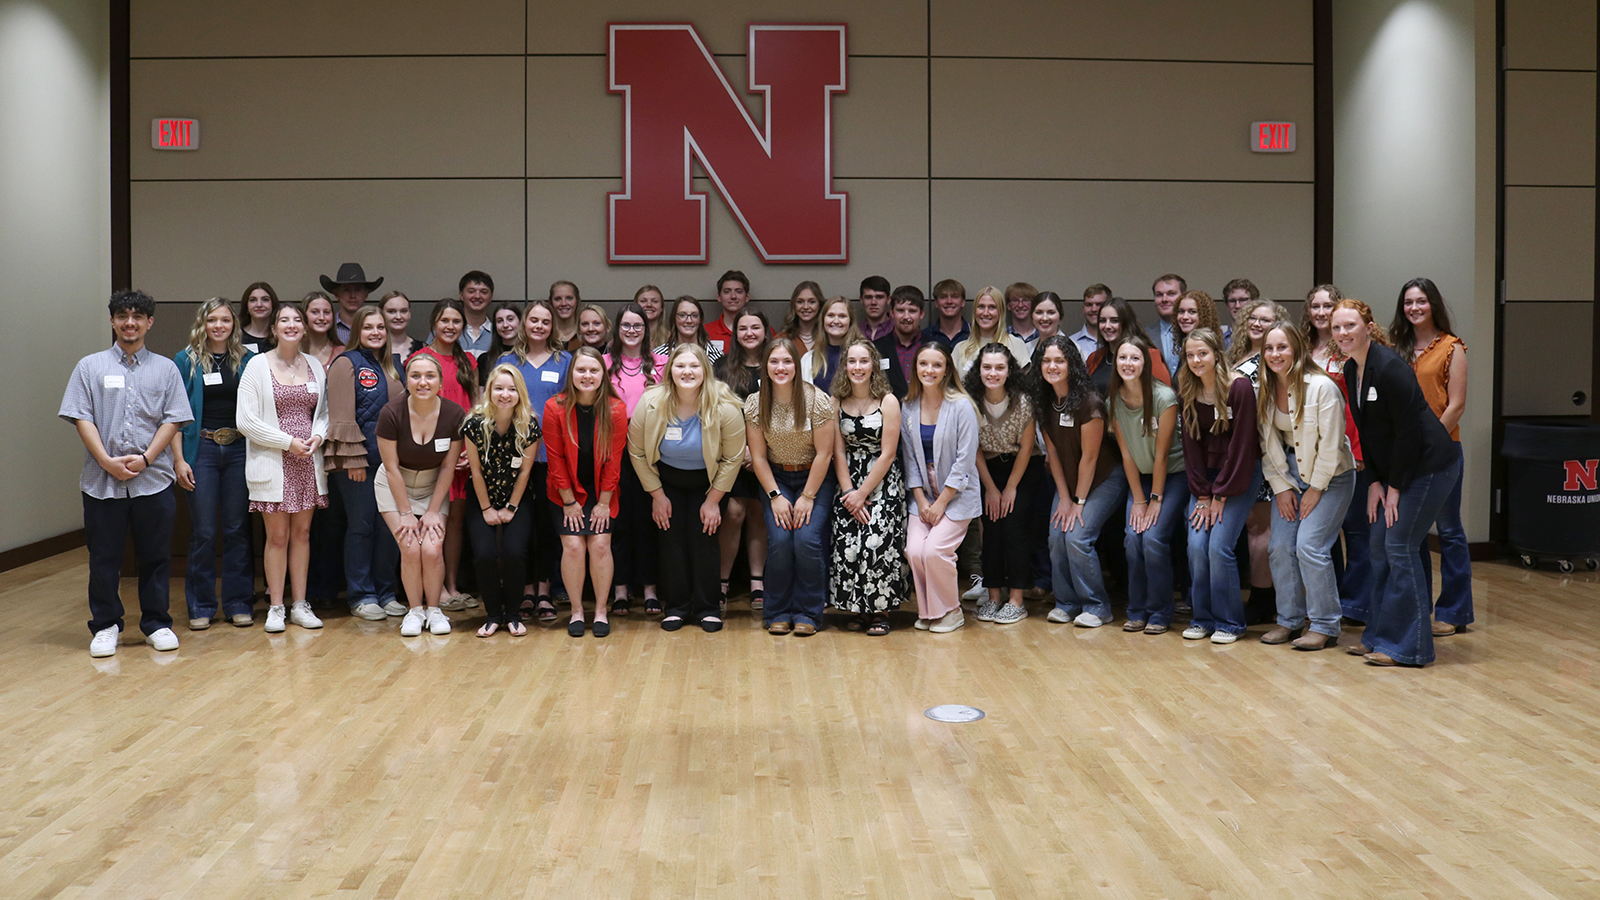 The Department of Animal Science announced the recipients of 108 scholarships on Sunday.